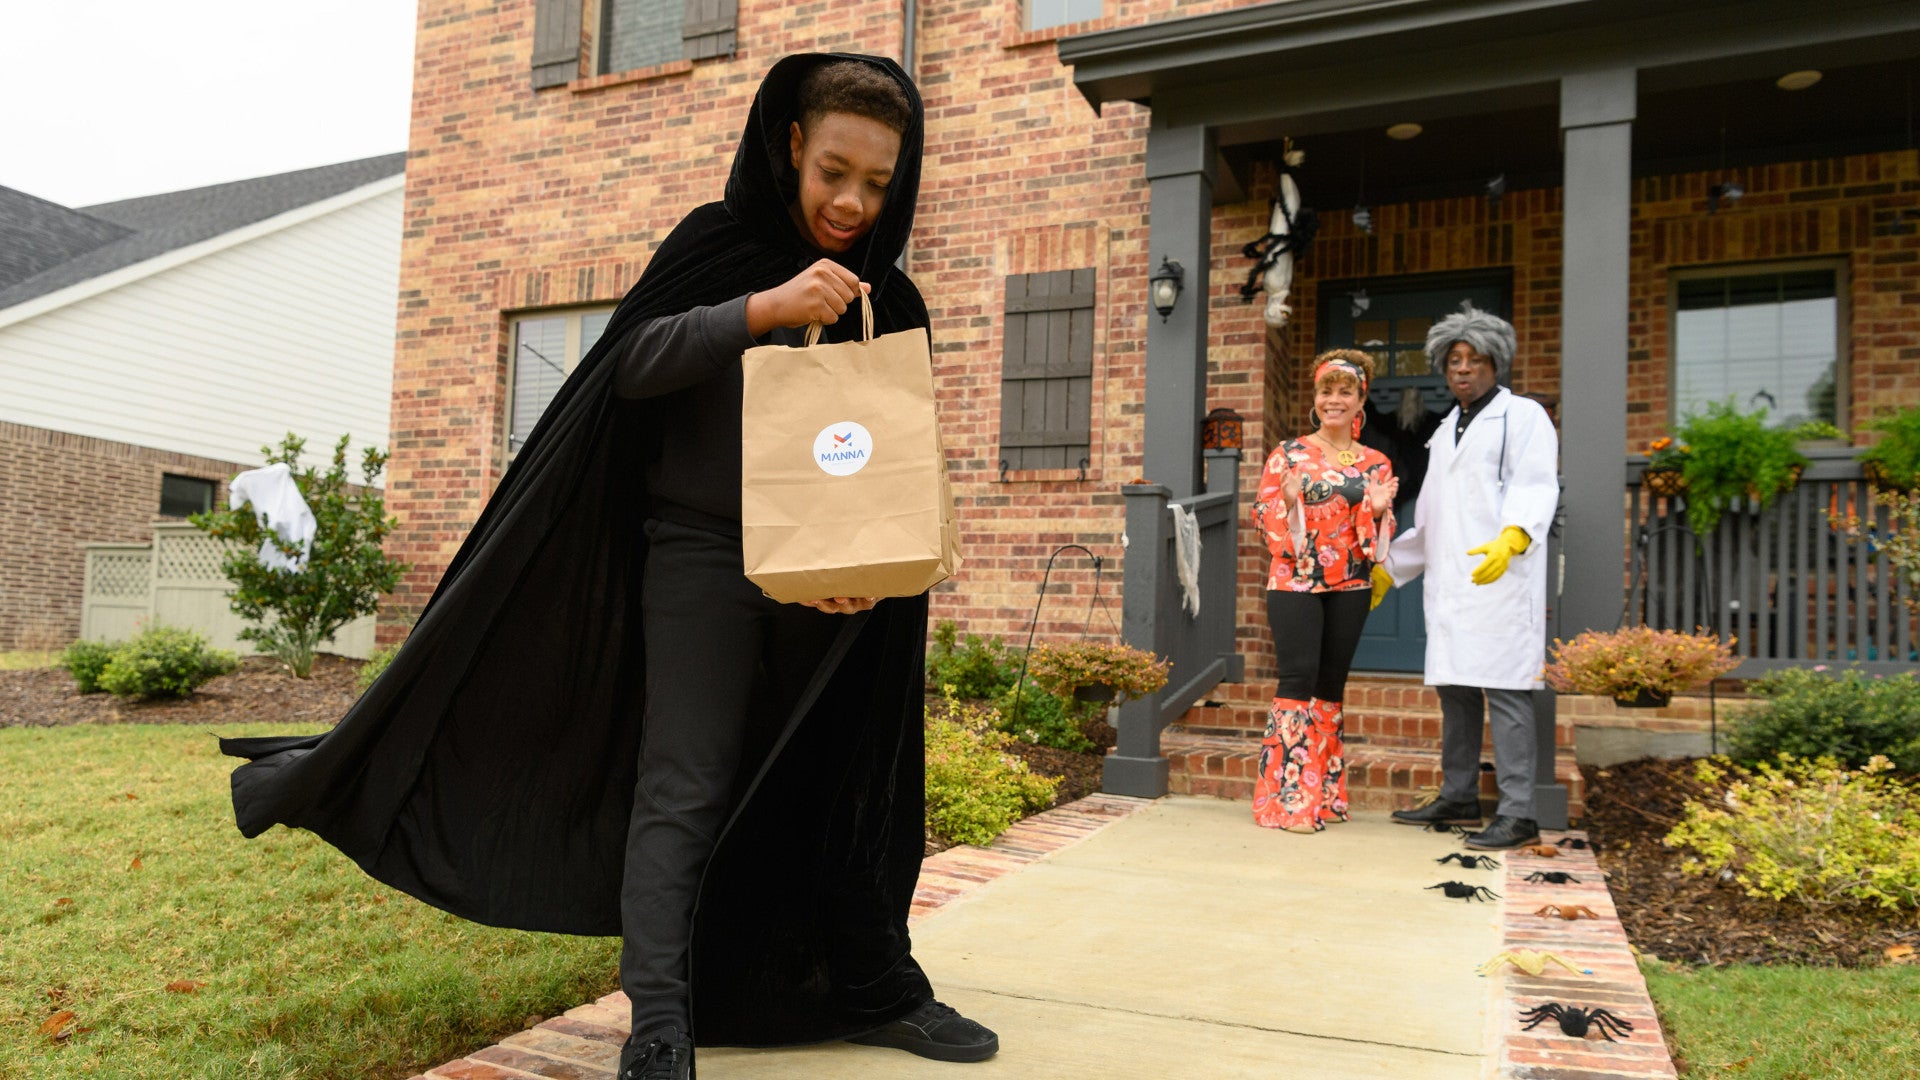 Manna Drone Delivery Launches in U.S. with Texas Trick-or-Treaters